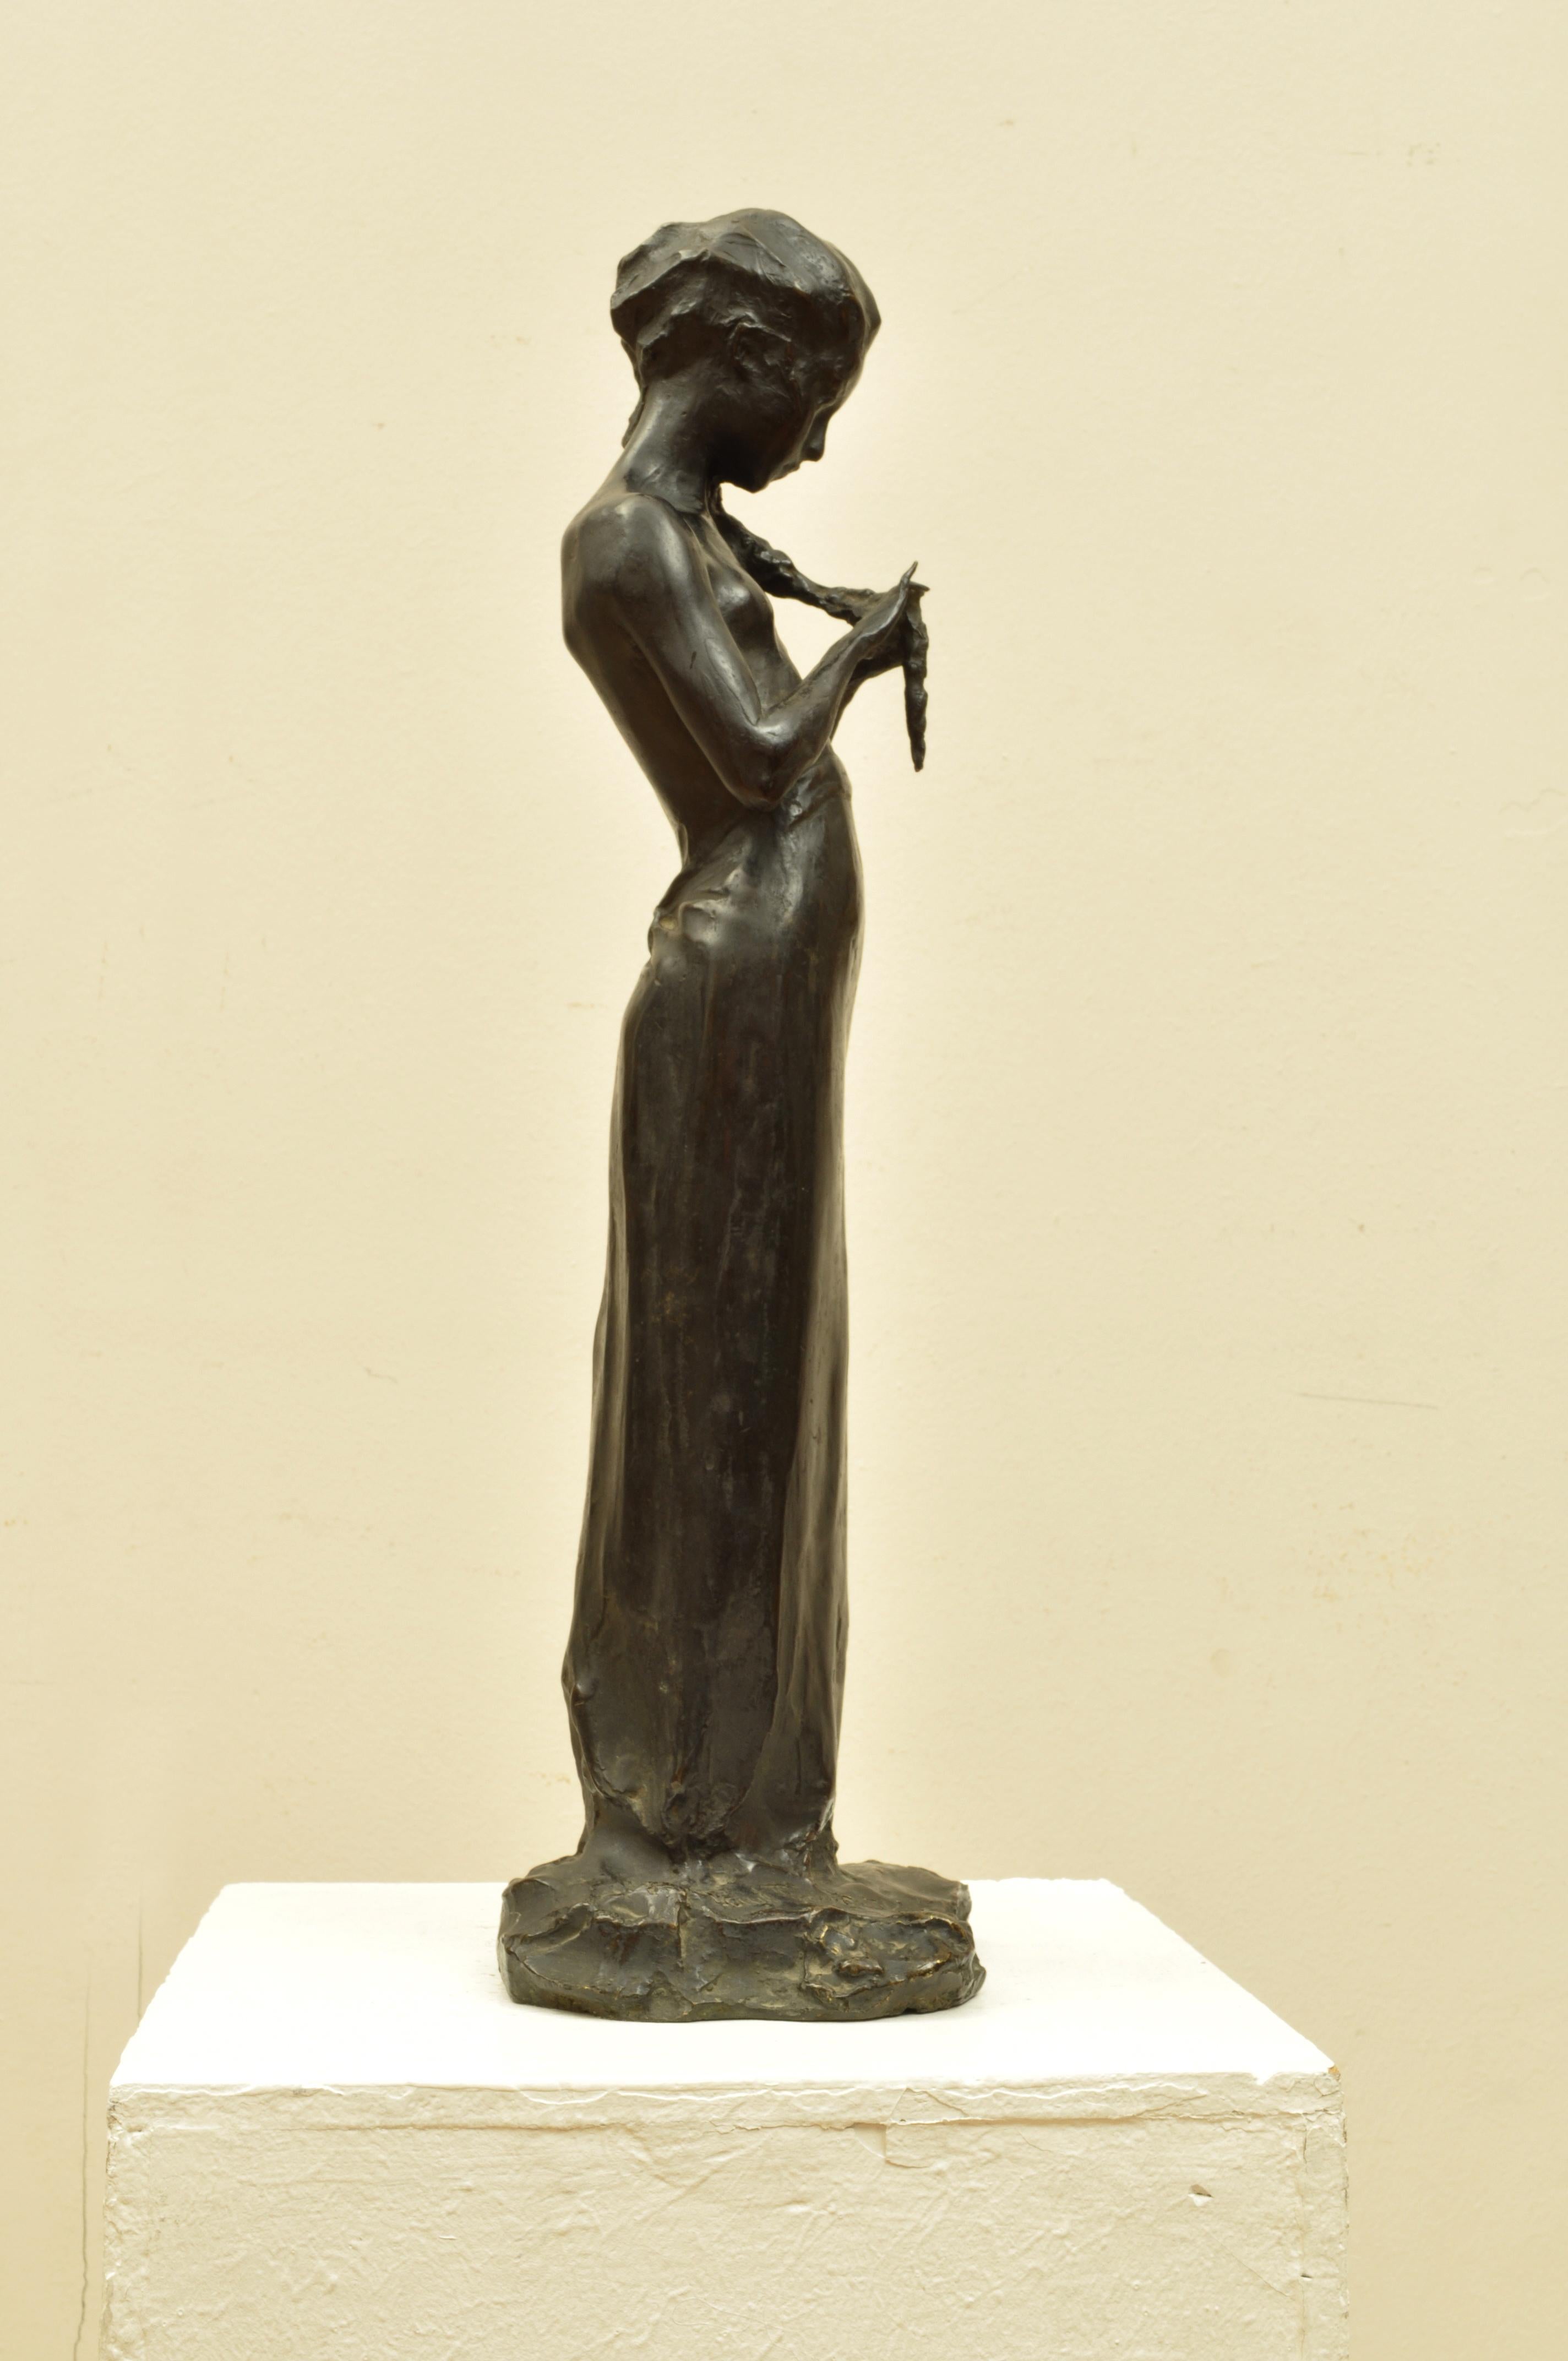 Prince Paul Troubetzkoy Figurative Sculpture - The girl with the braid